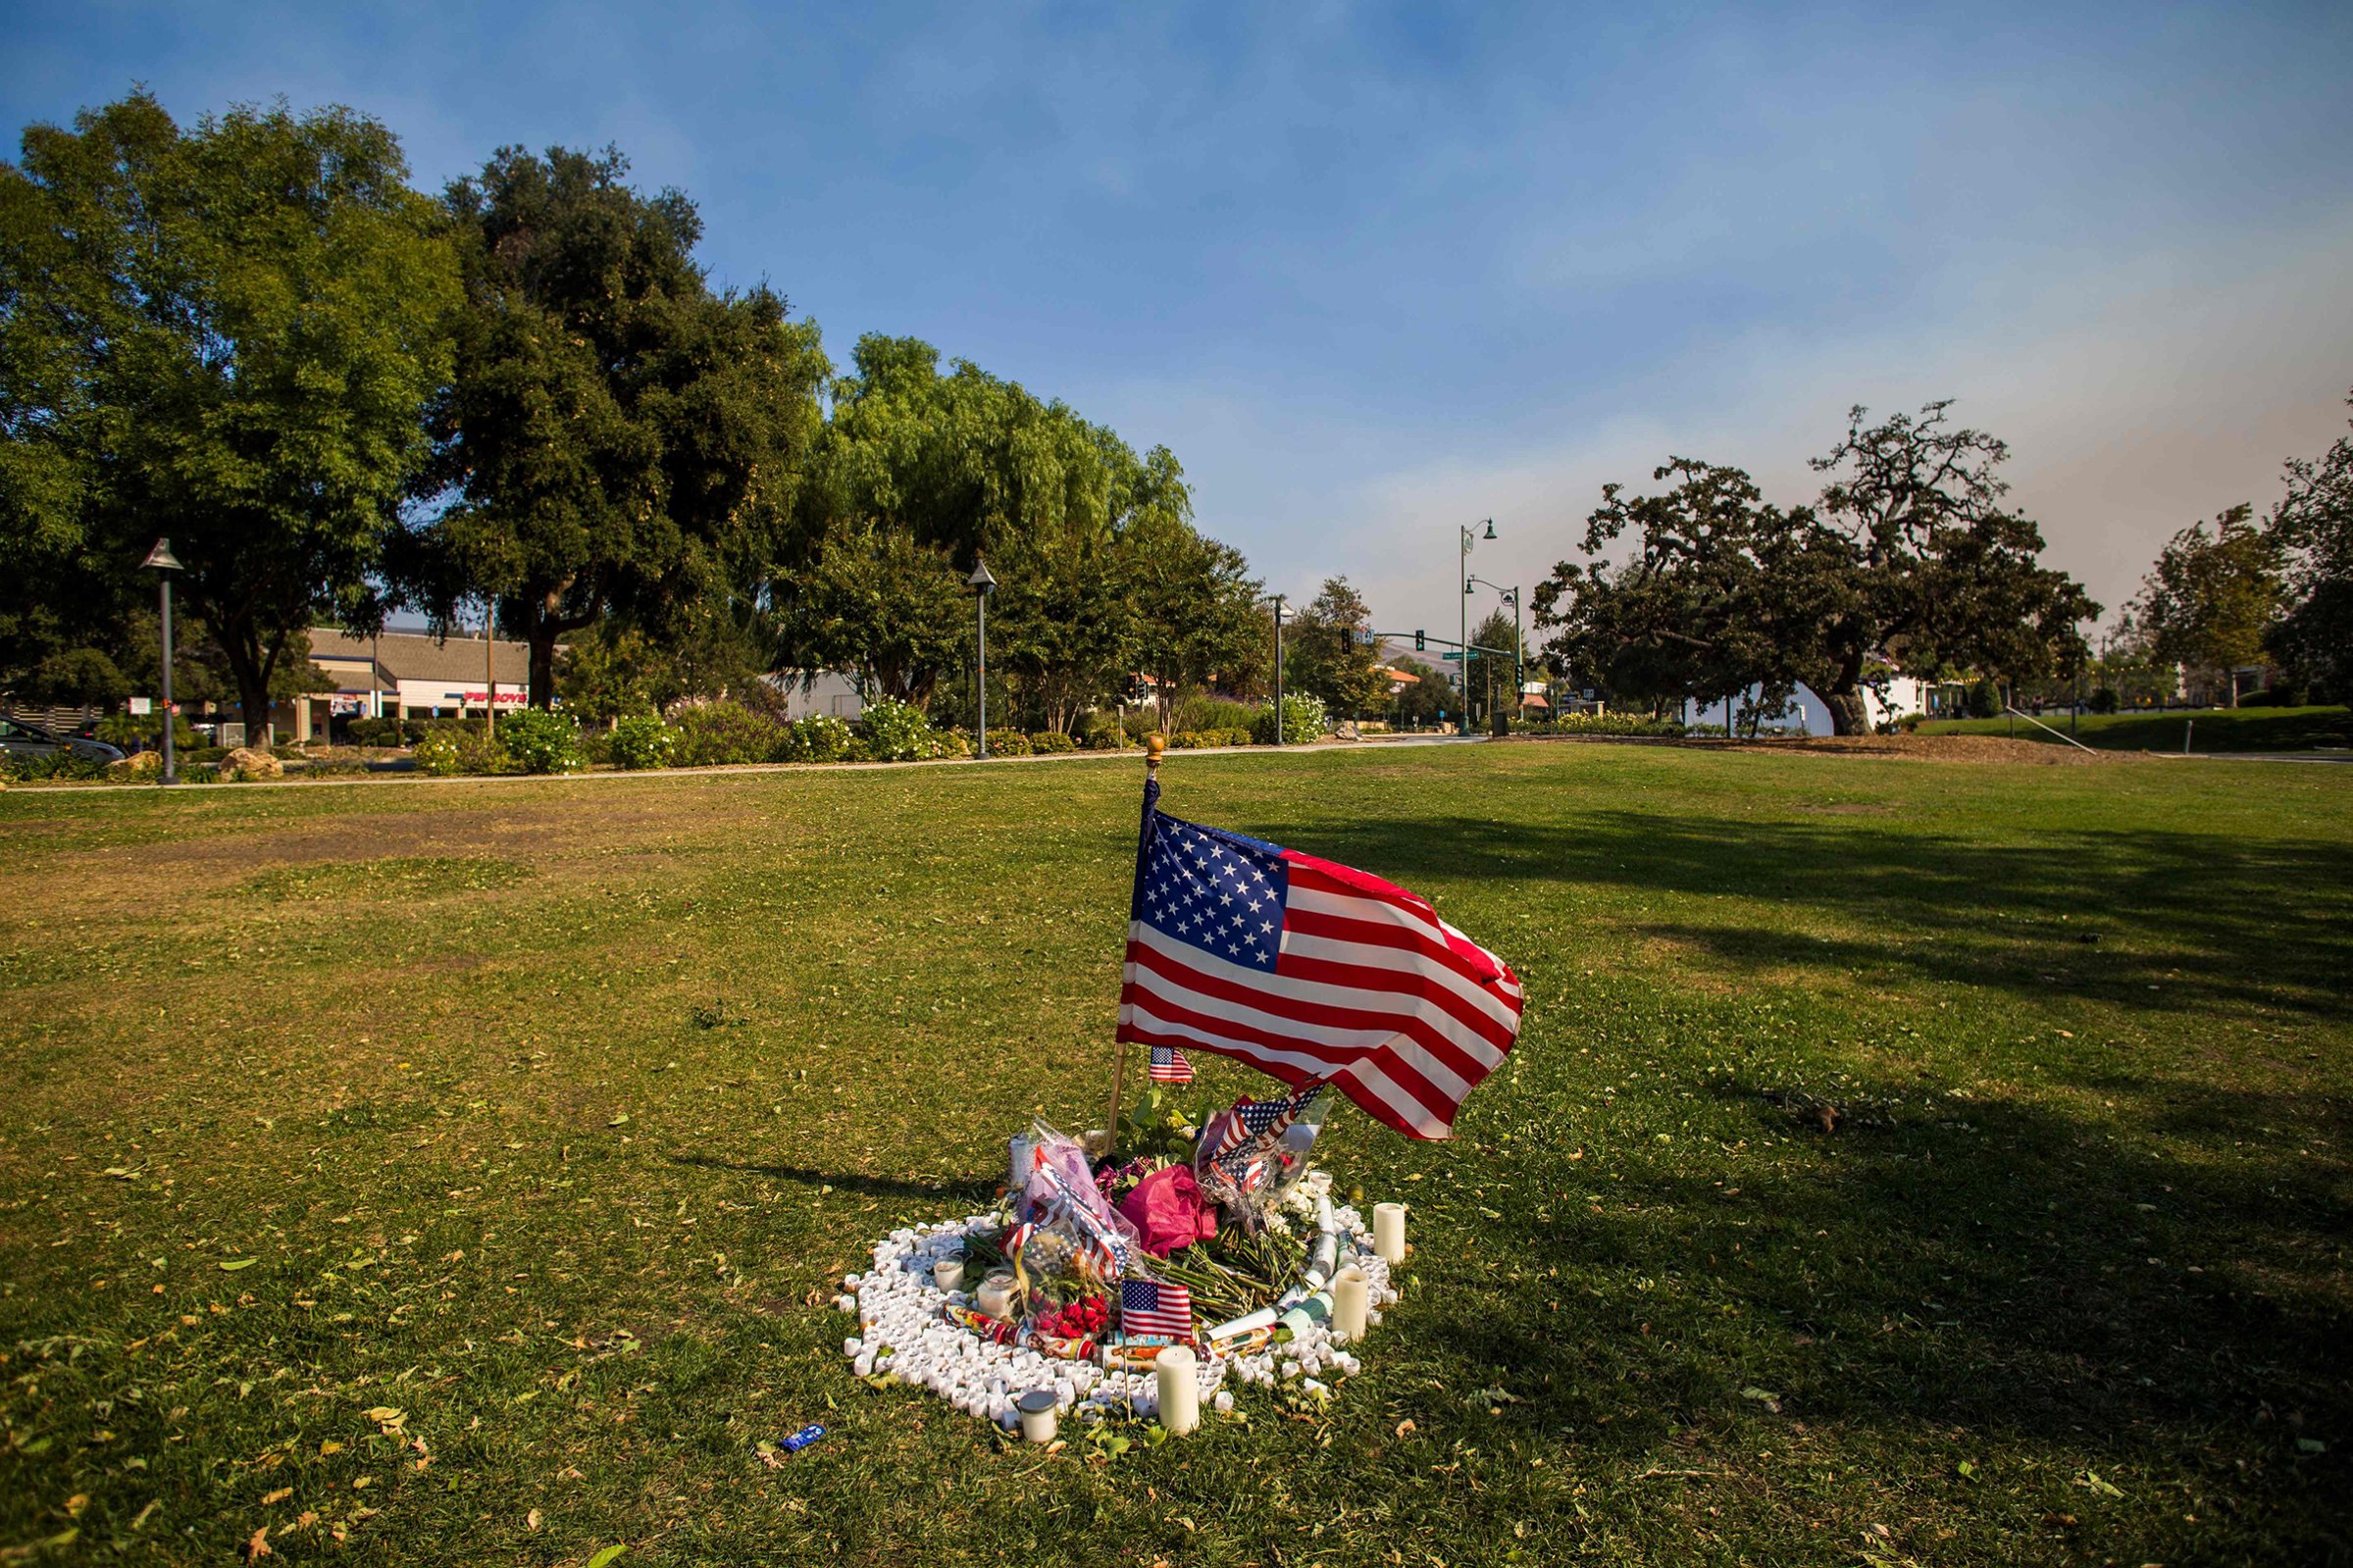 A memorial for the victims of the Thousand Oaks shooting